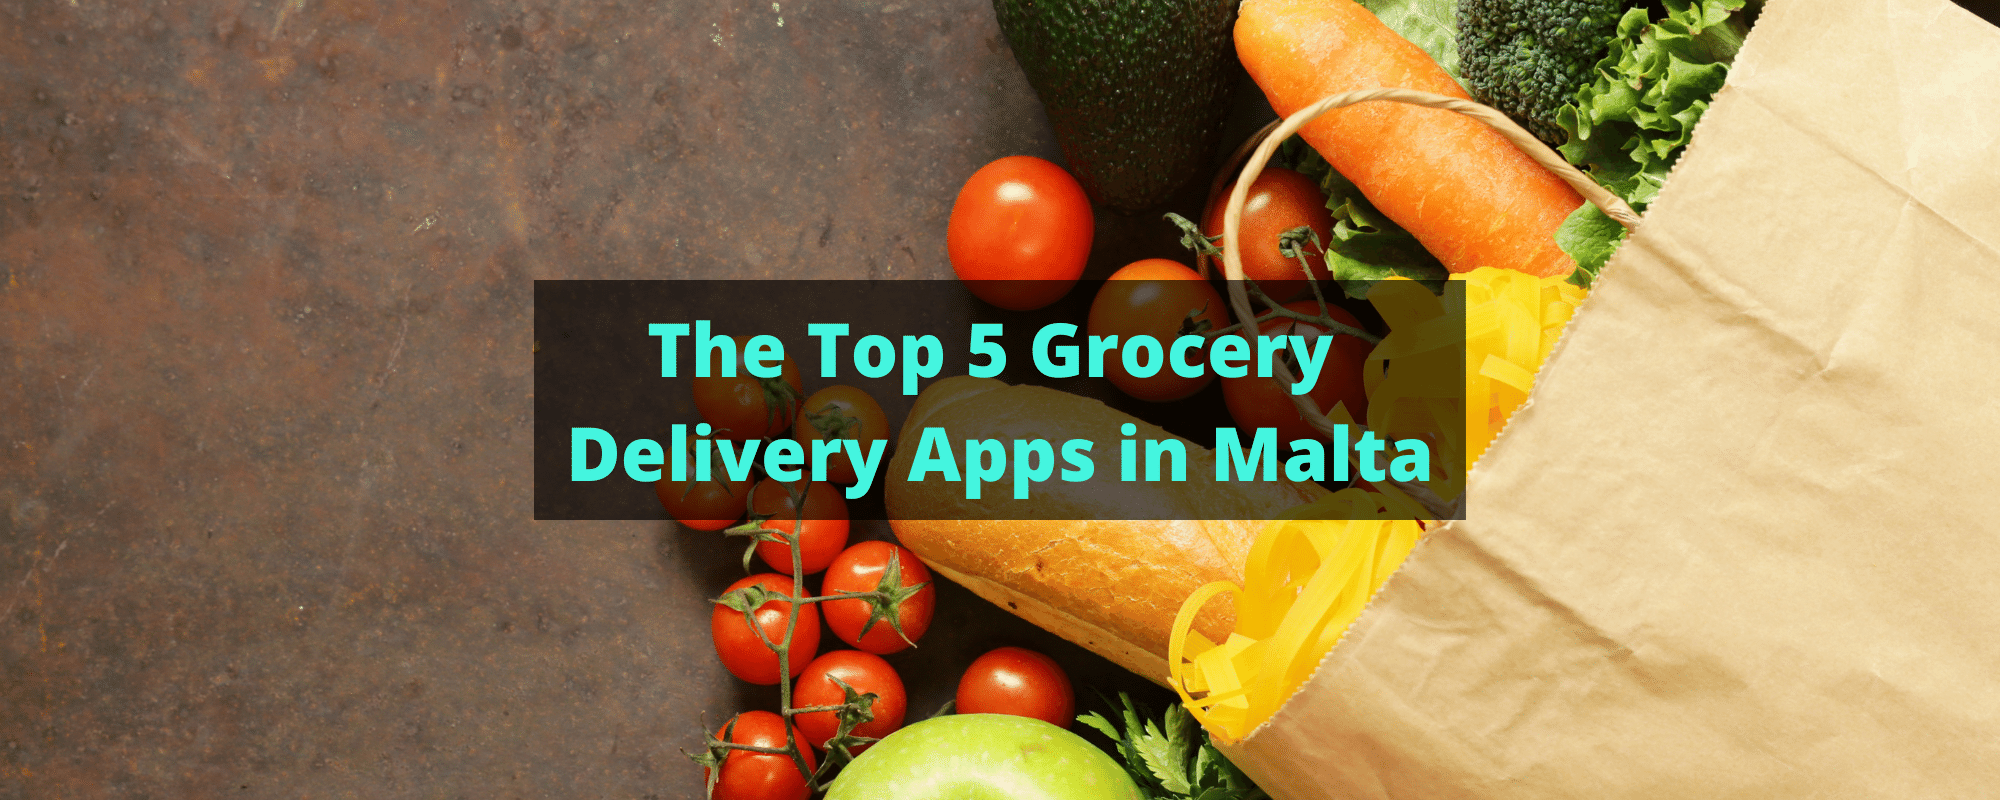 grocery delivery apps in malta